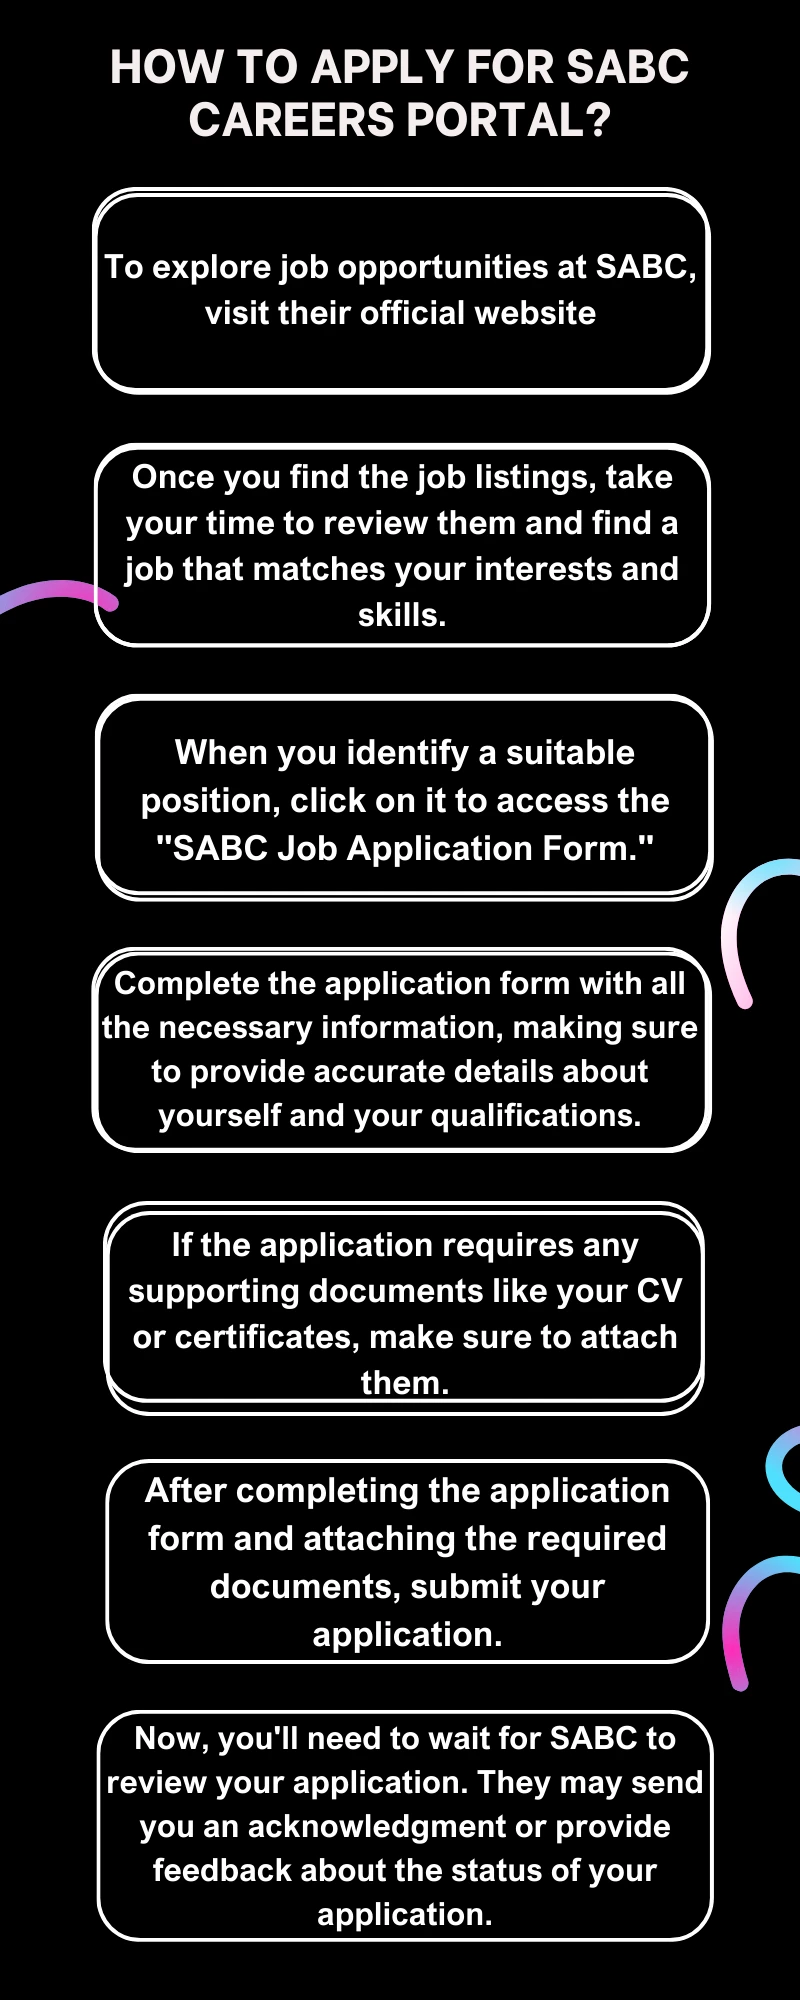 How To Apply for Sabc Careers Portal?